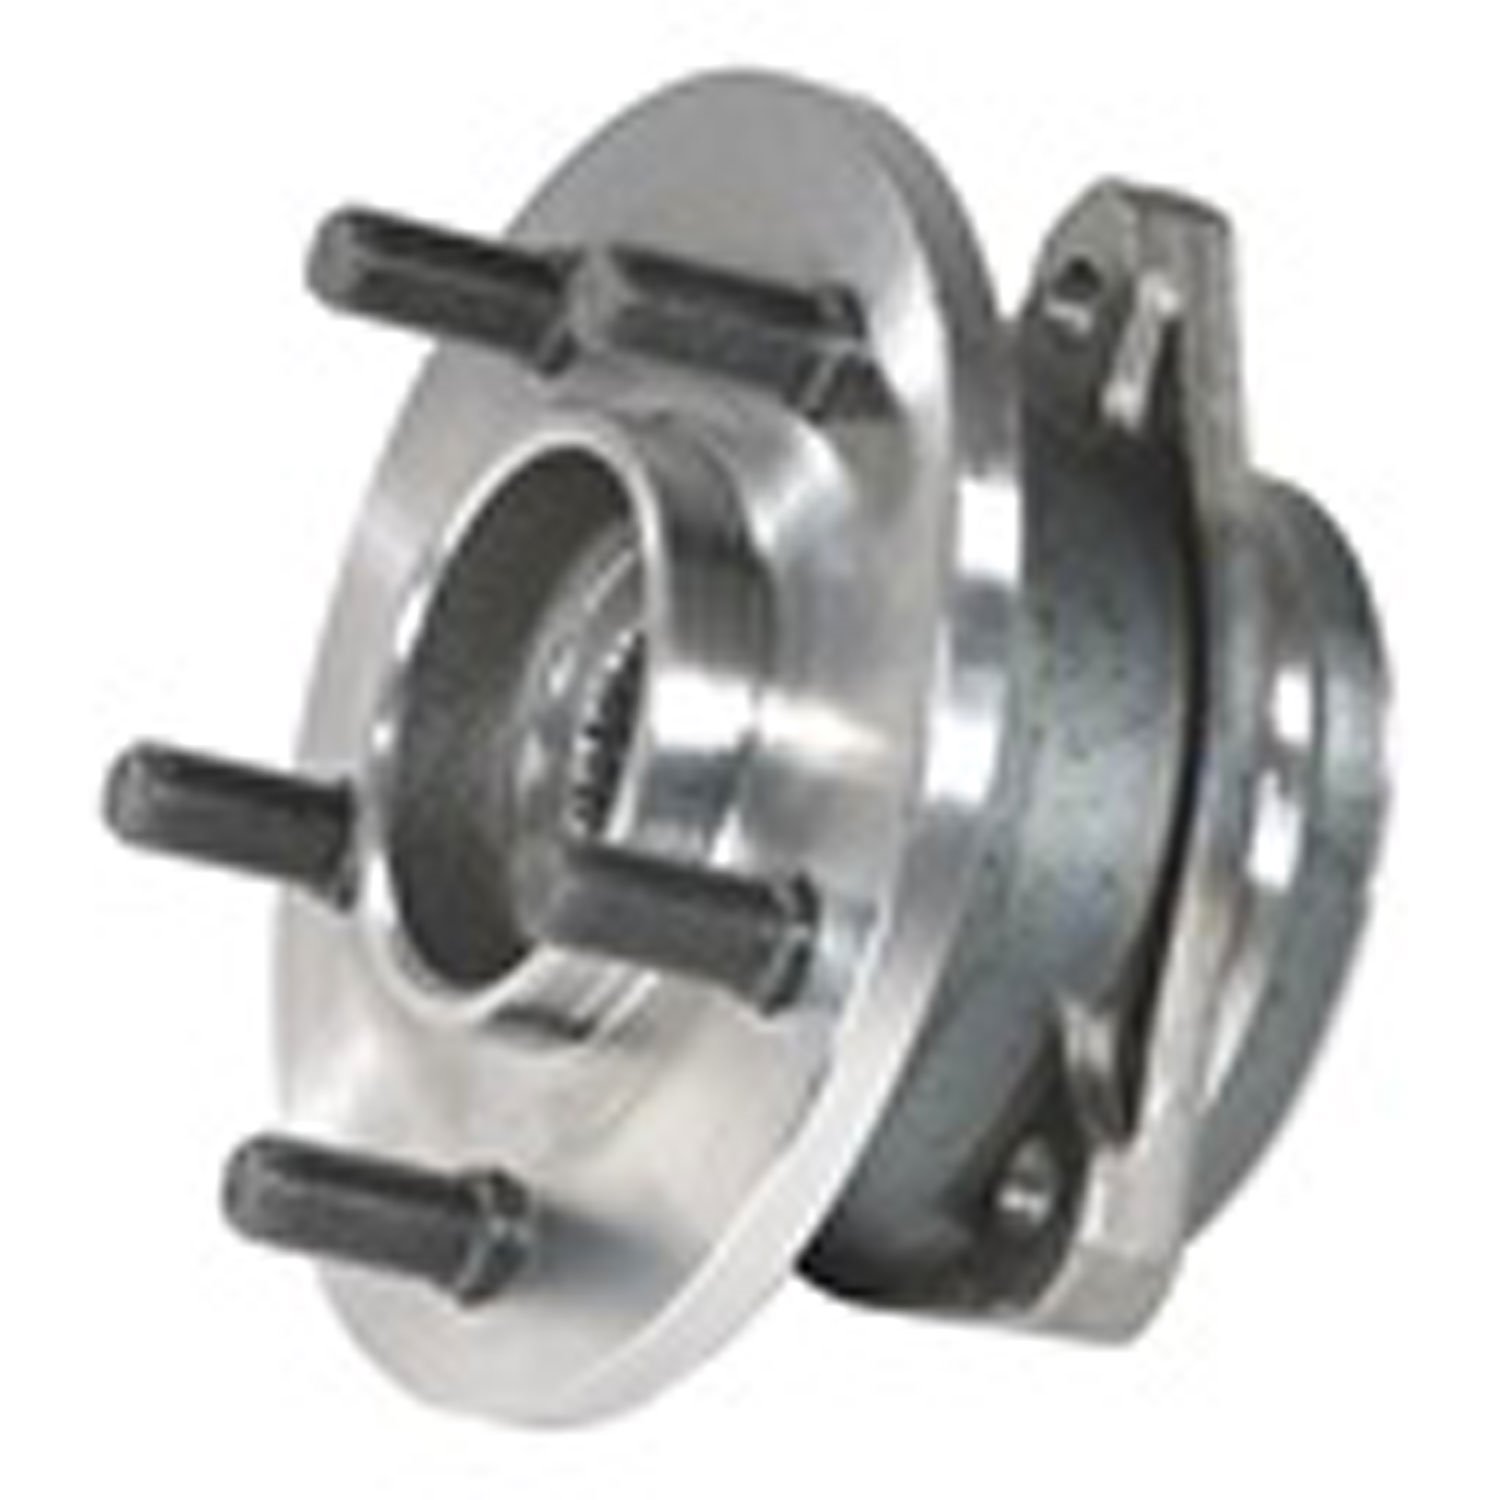 This front hub assembly from Omix-ADA fits 90-00 Jeep Wrangler Cherokees and Grand Cherokees. Fits l